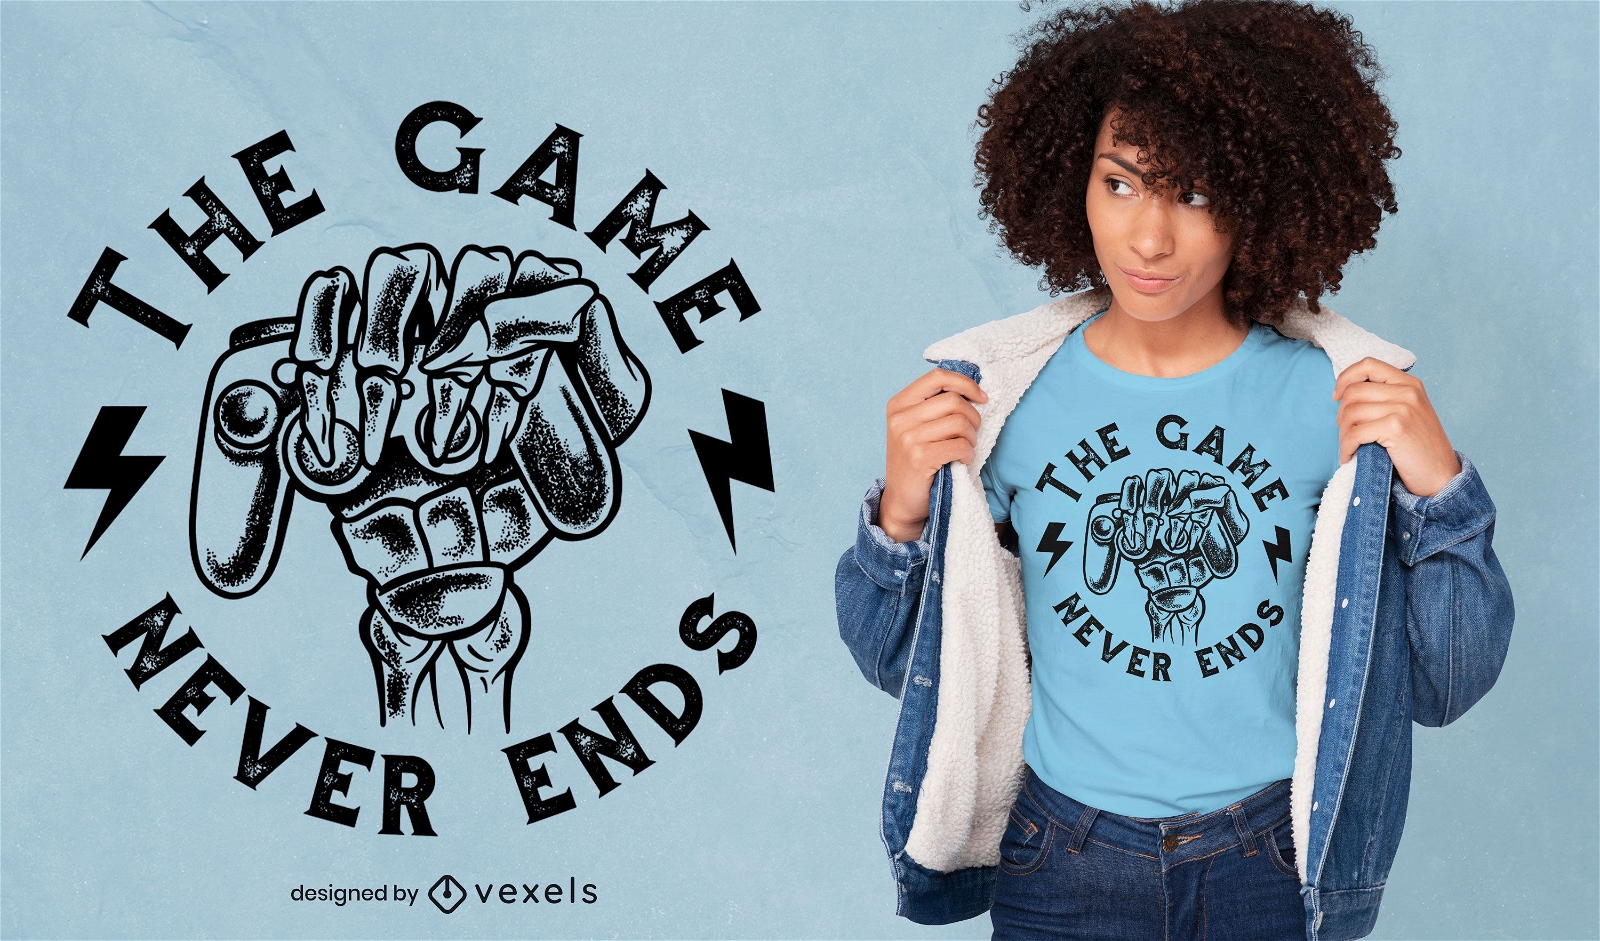 Funny gaming quote t-shirt design